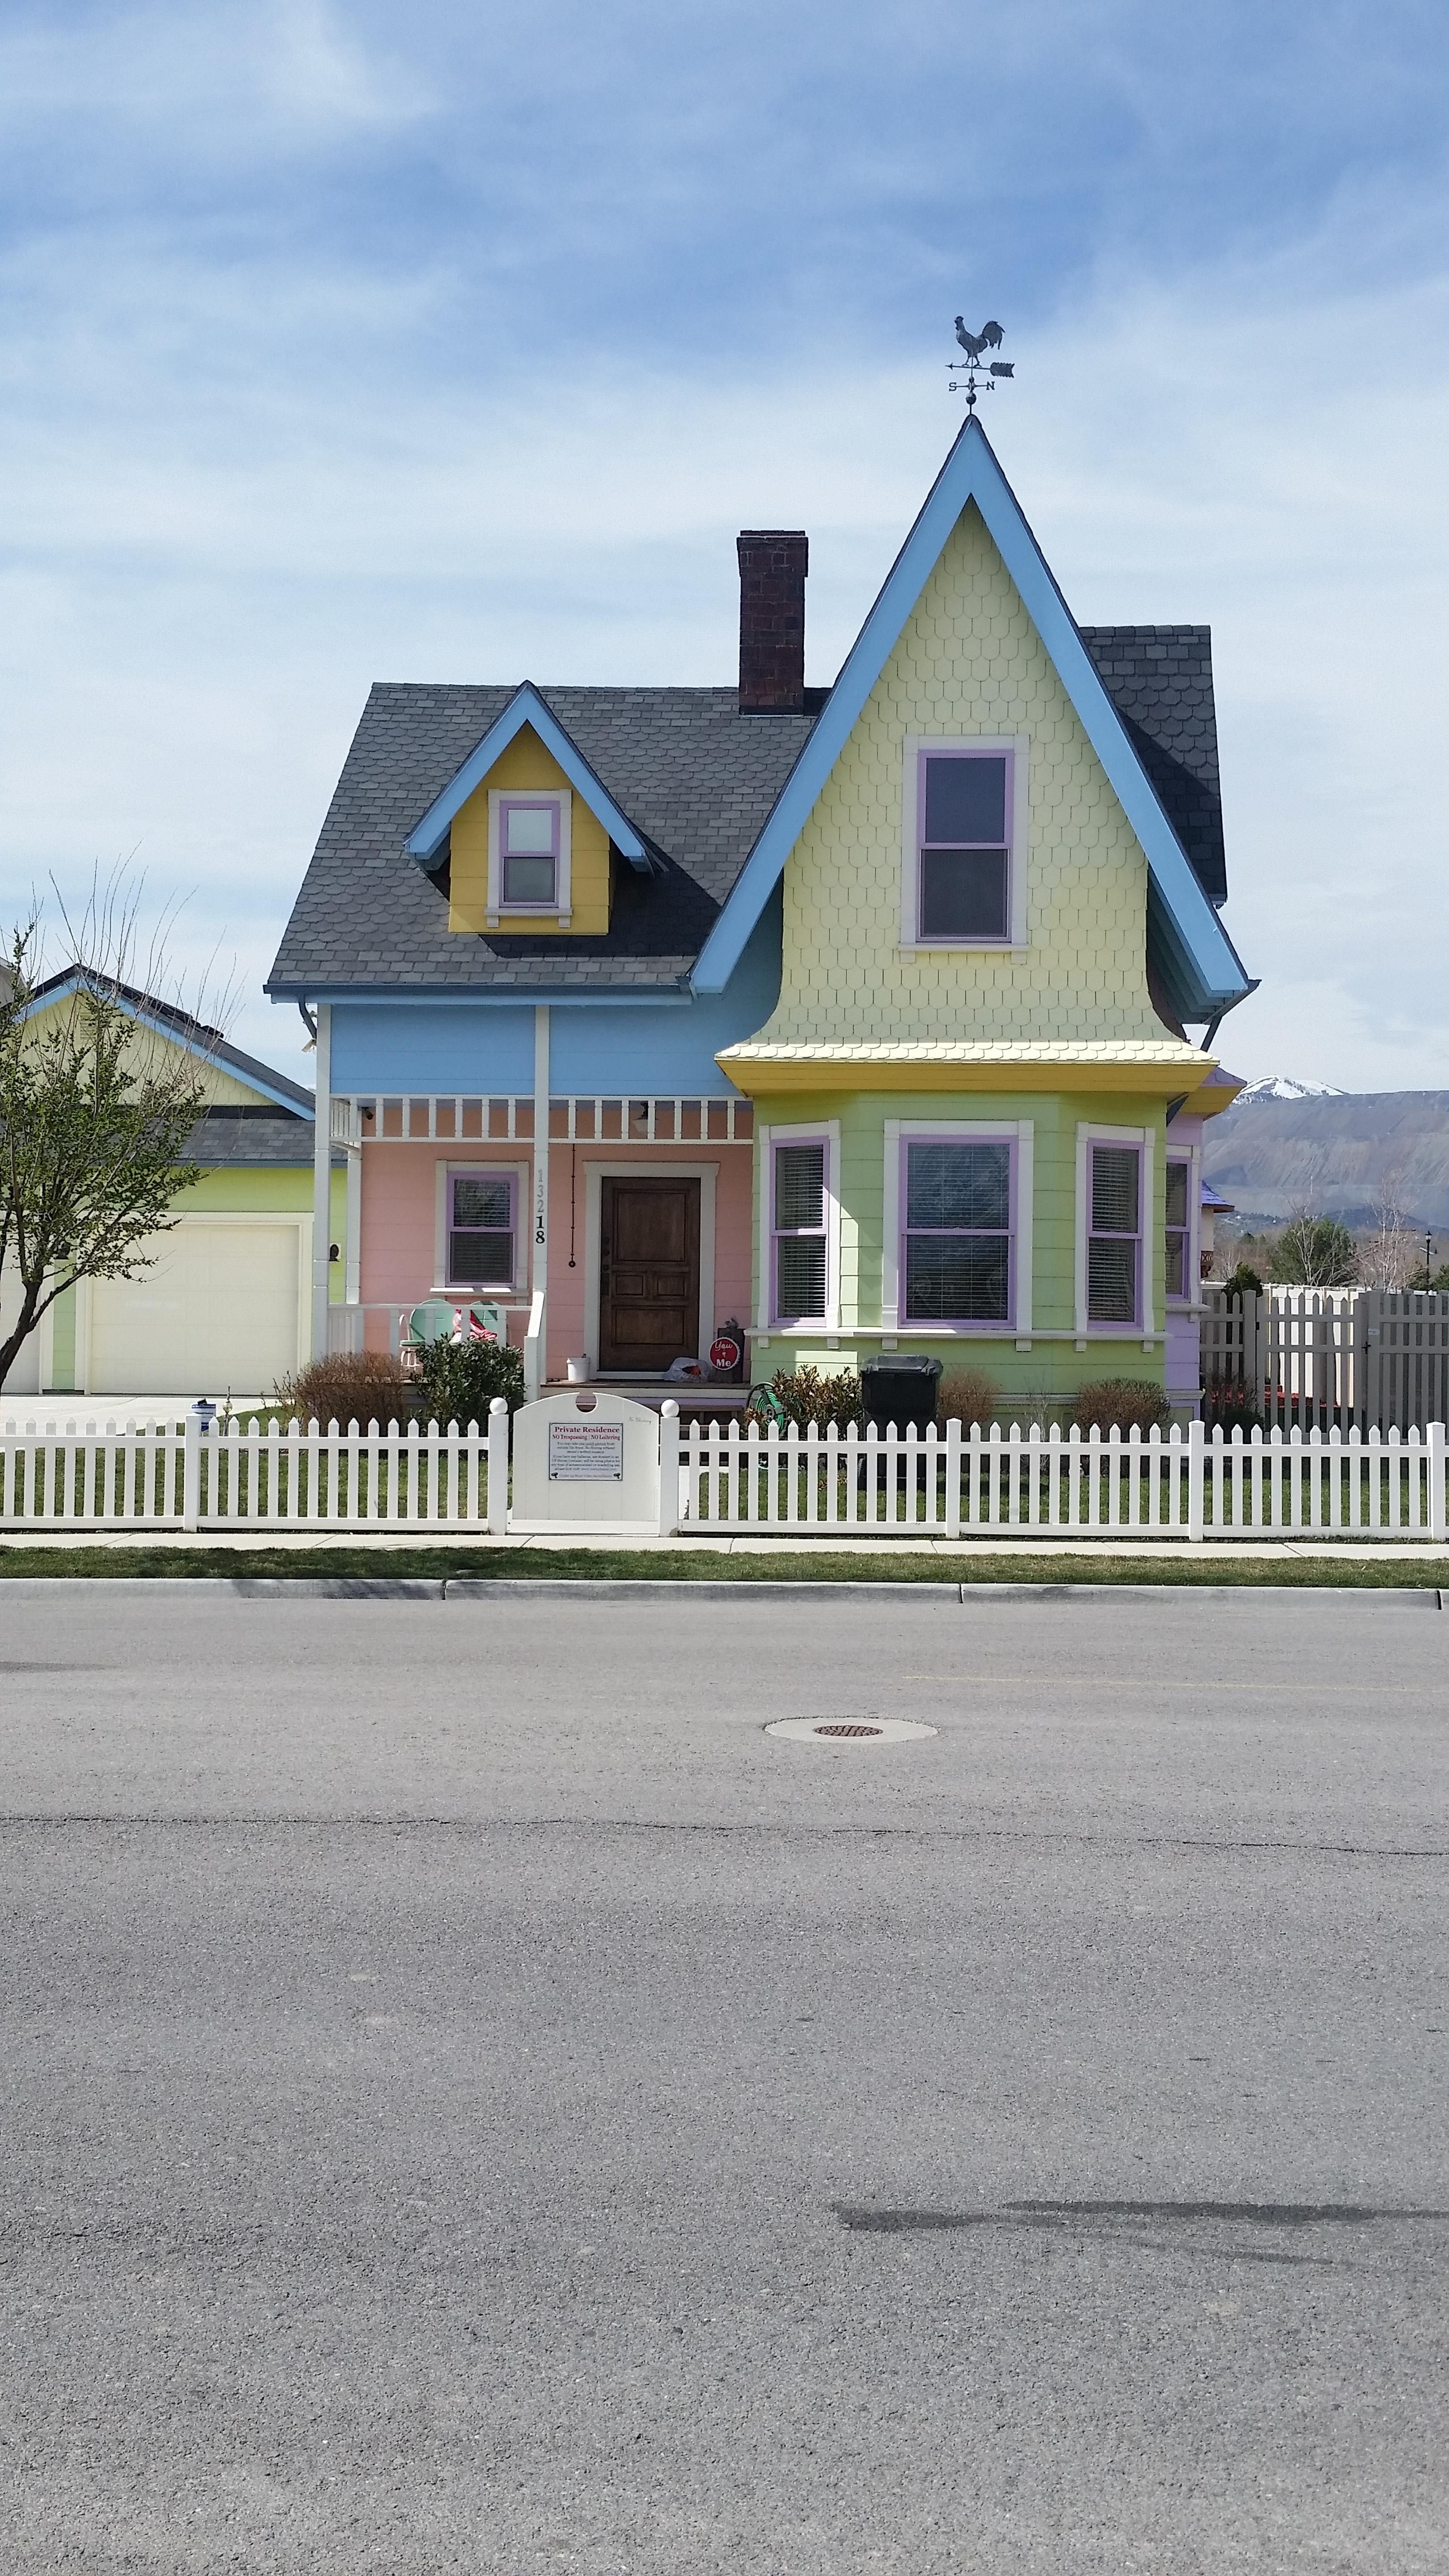 This Re-Creation of the House From 'Up' Is Just as Cute as the Movie - See  the Real-Life 'Up' House